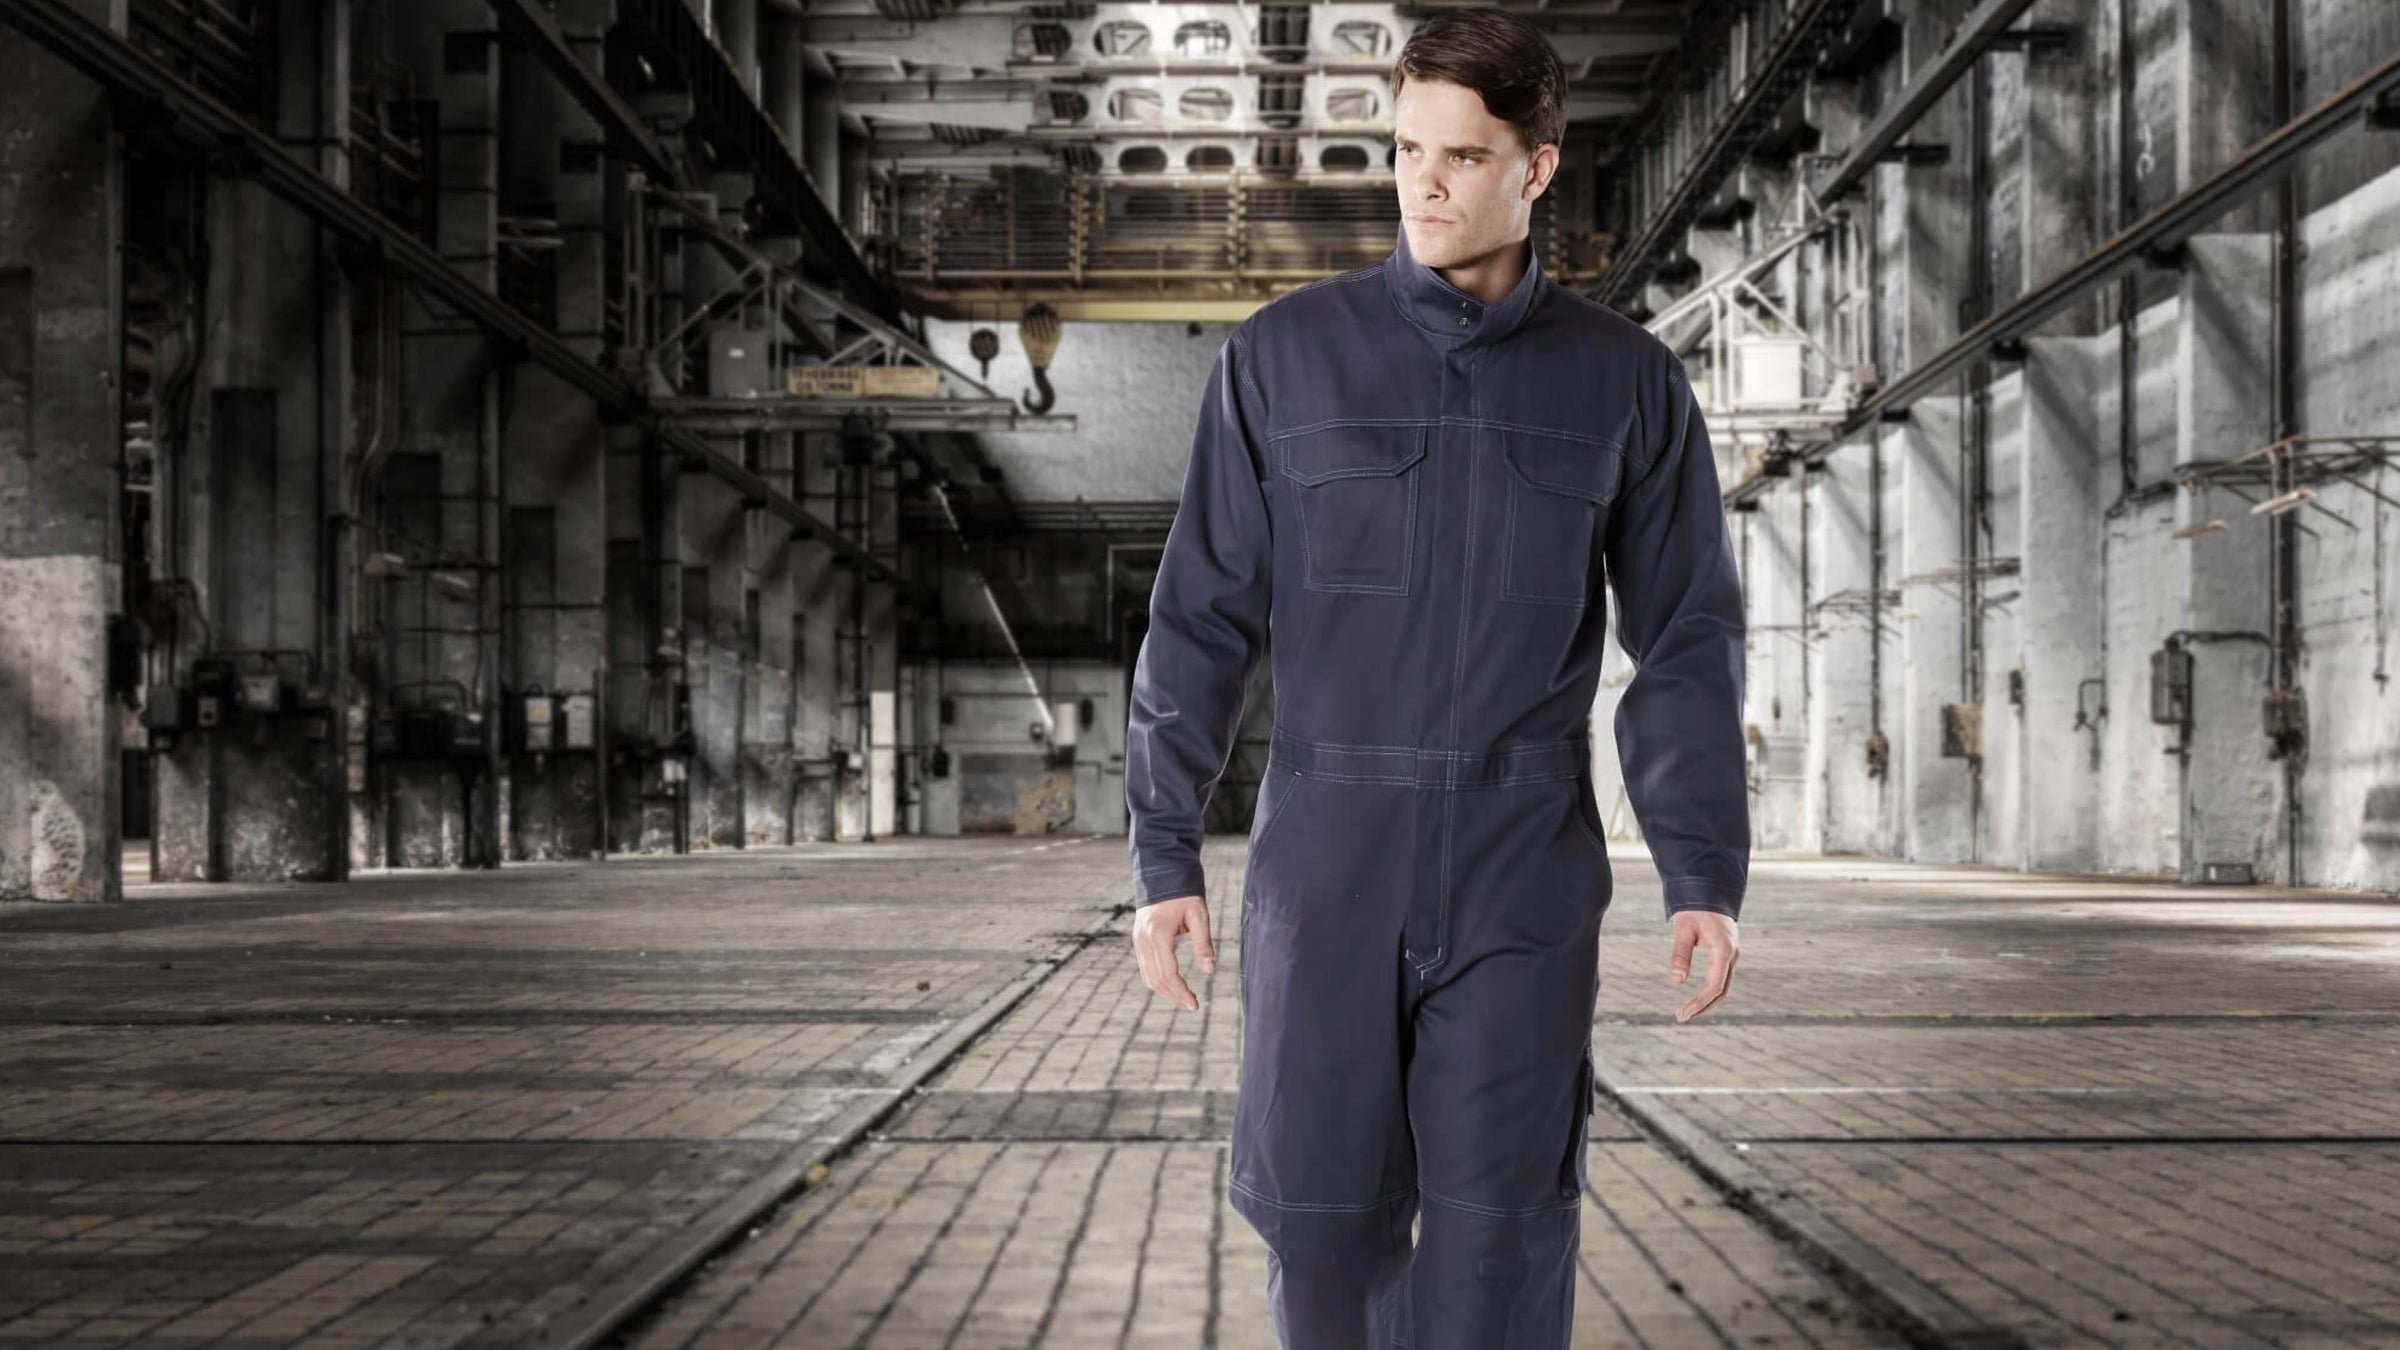 Disposable Safety Protective Clothing Coveralls - China Protection  Coveralls and Disposable Clothing price